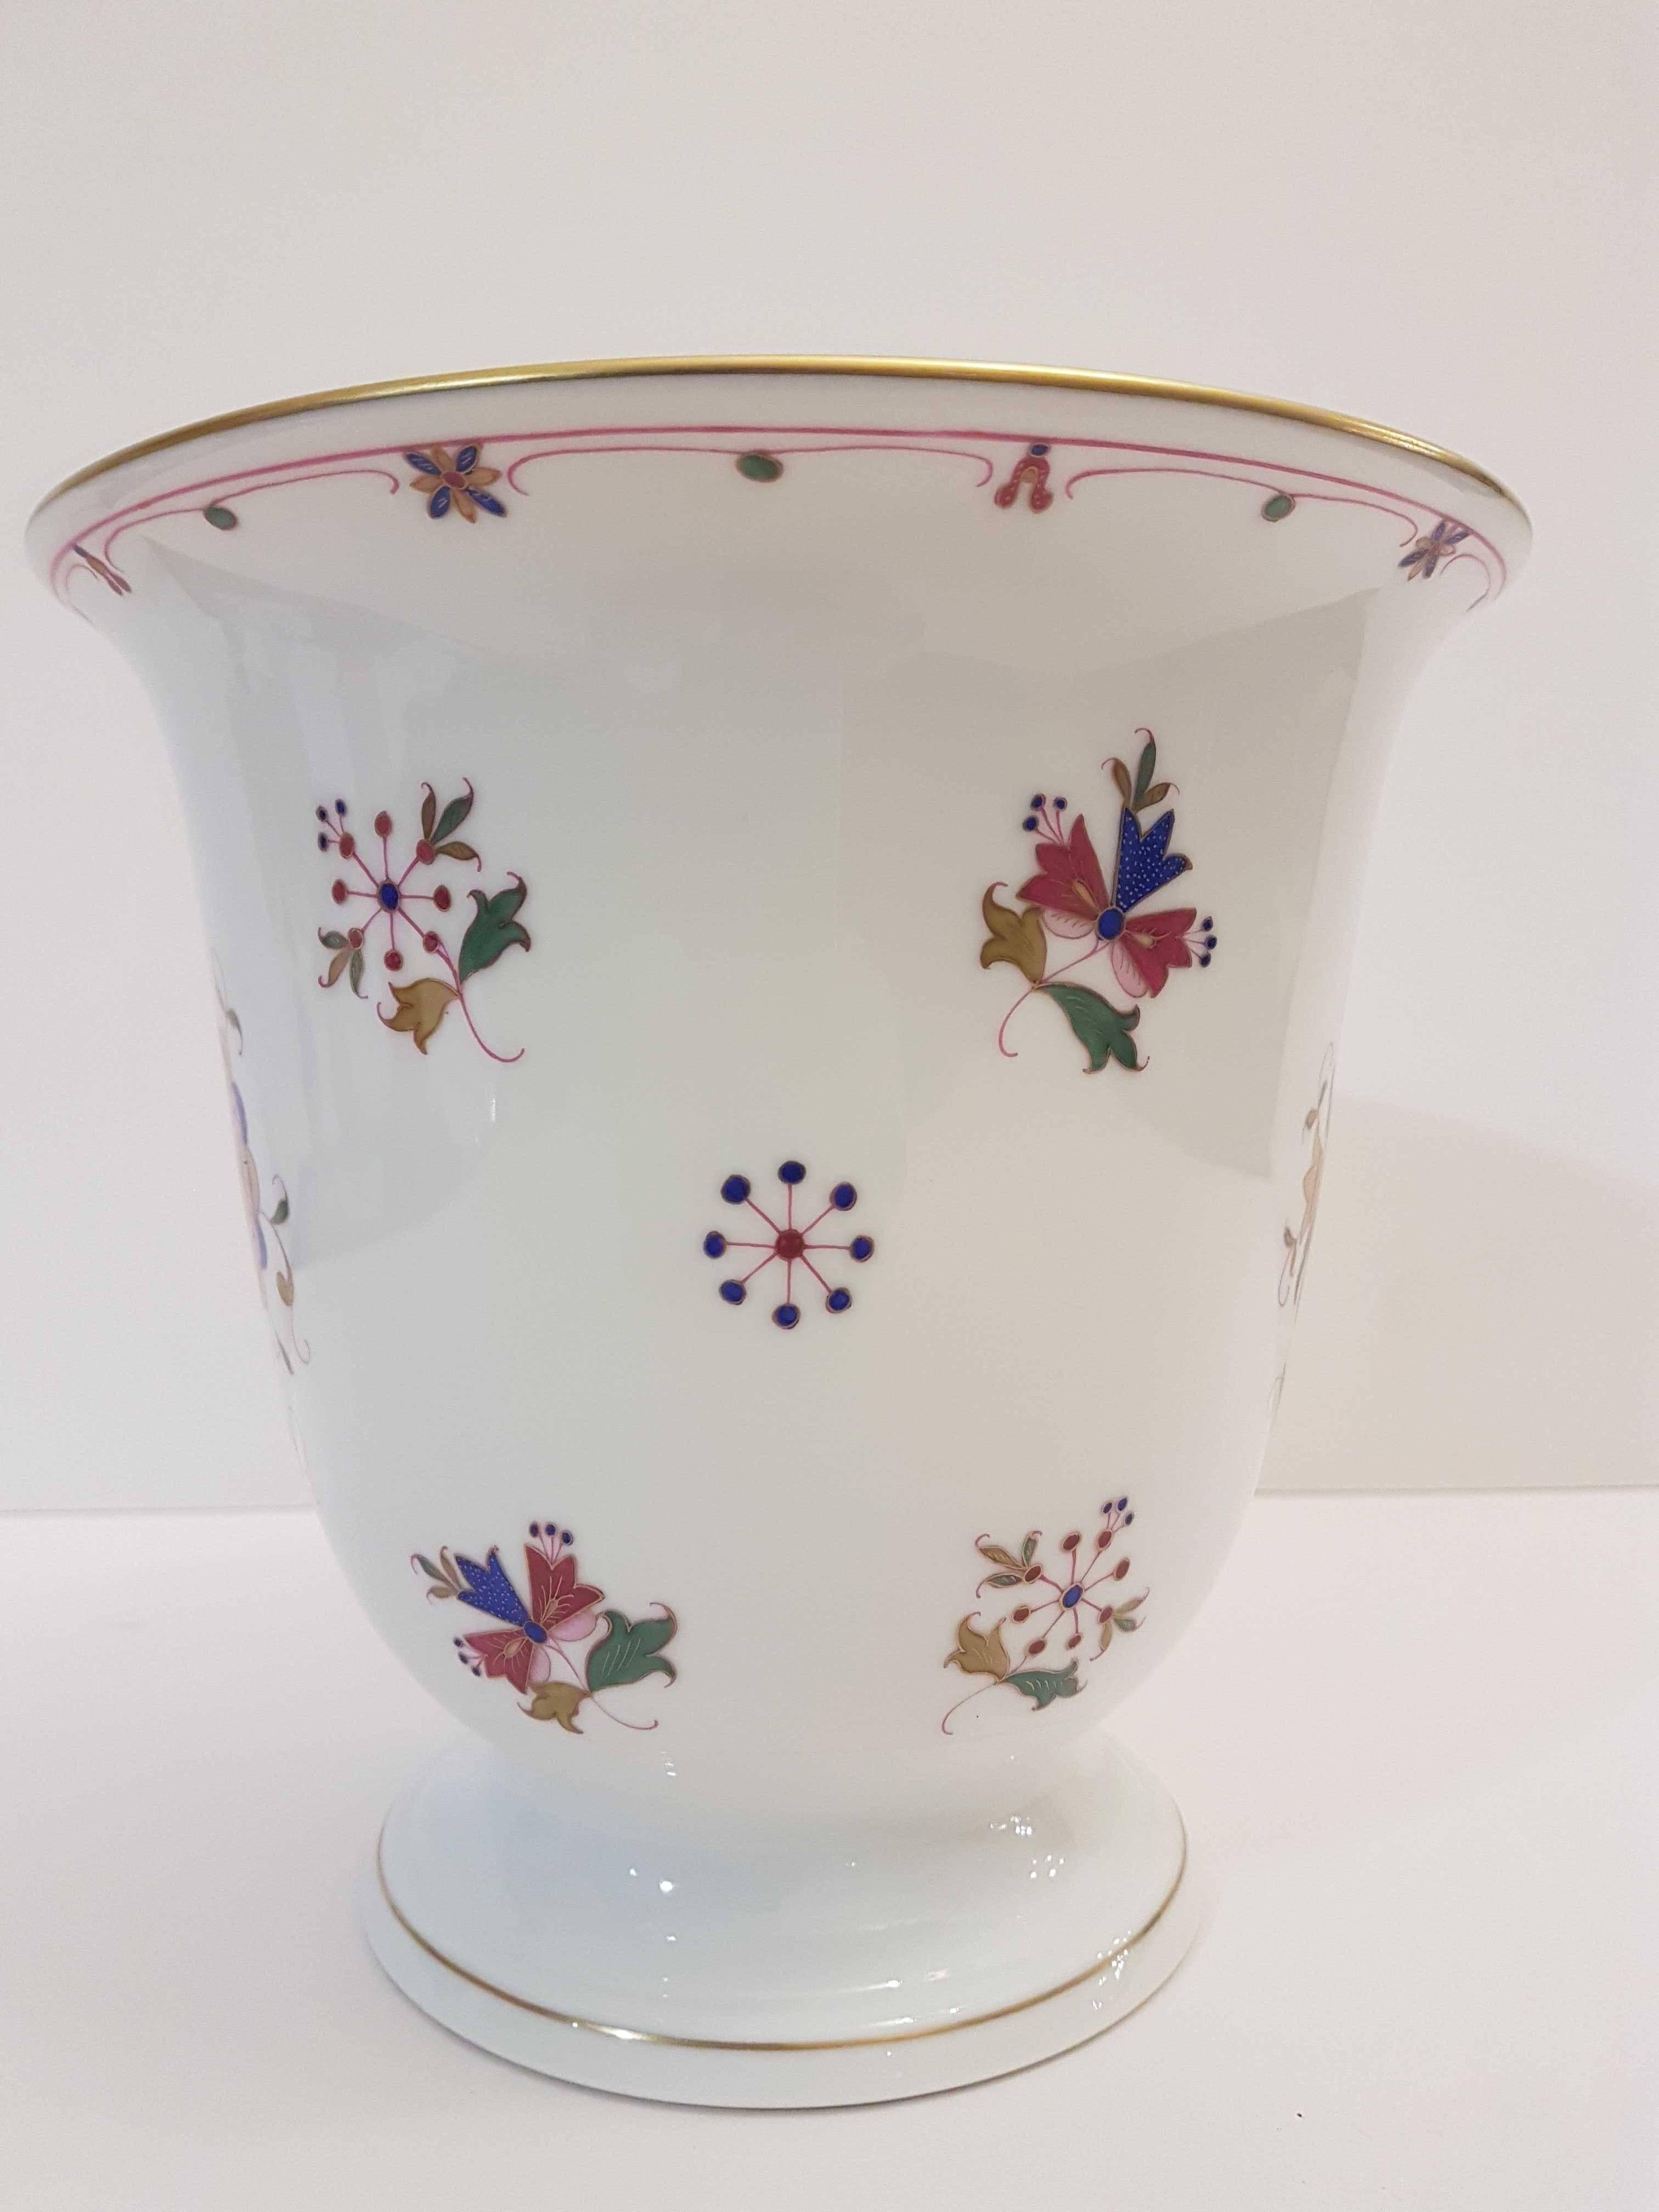 Exquisite vase in hand-painted Hungarian porcelain by Herend.
In 